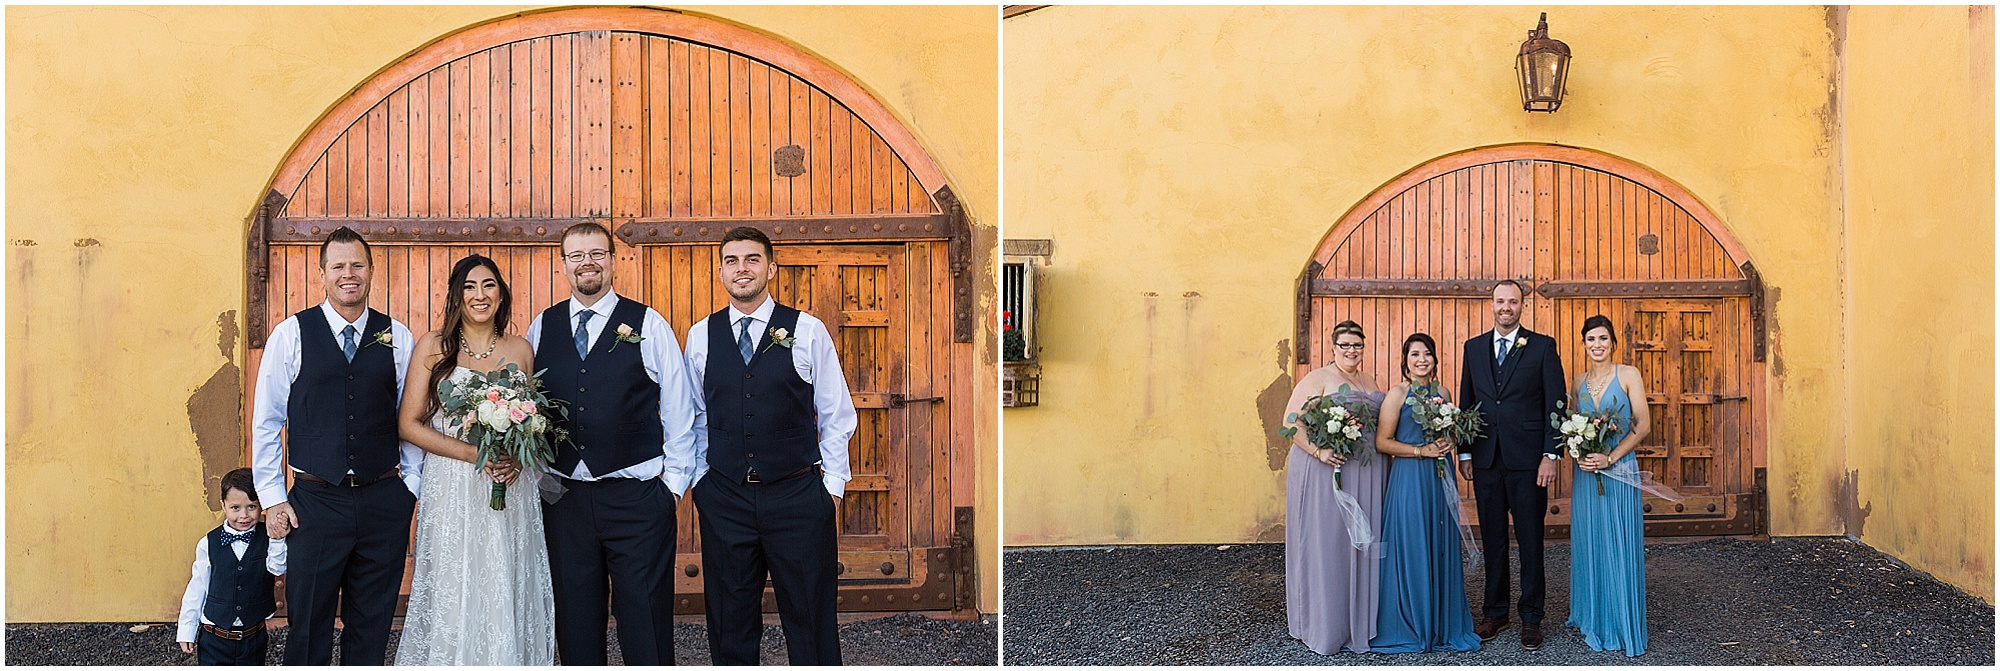 Wedding party portraits are an important part of your day. Photographed by Bend Oregon wedding photographer Erica Swantek Photography